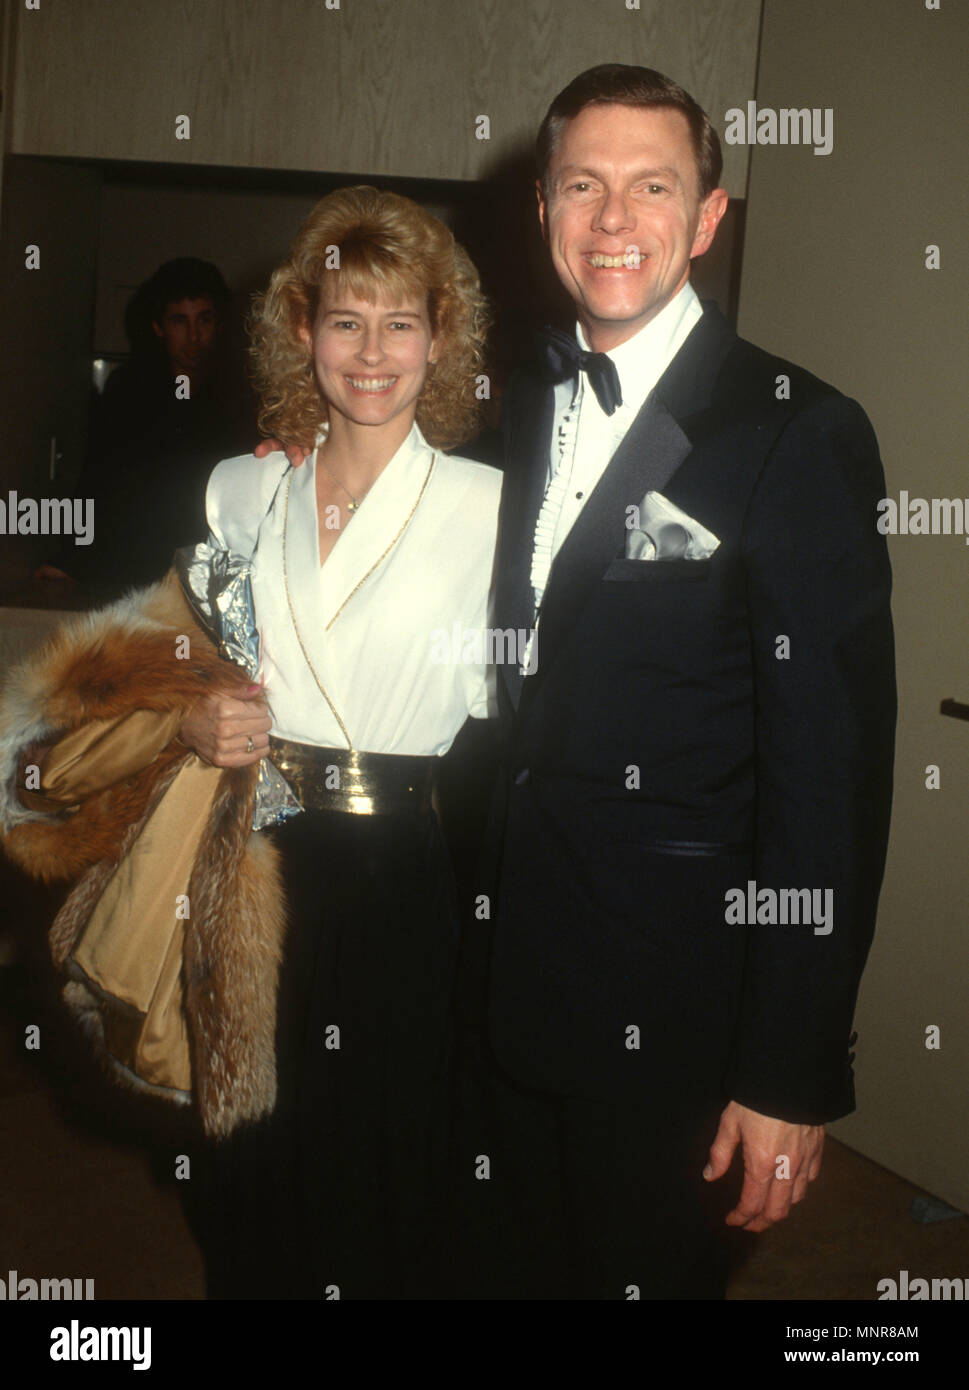 BEVERLY HILLS, CA - JANUARY 12: Singer/musician Richard Carpenter (R) and wife Mary Carpenter (L) attend American Cinema Awards on January 12, 1991 at the Beverly Hilton Hotel in Beverly Hills, California. Photo by Barry King/Alamay Stock Photo Stock Photo